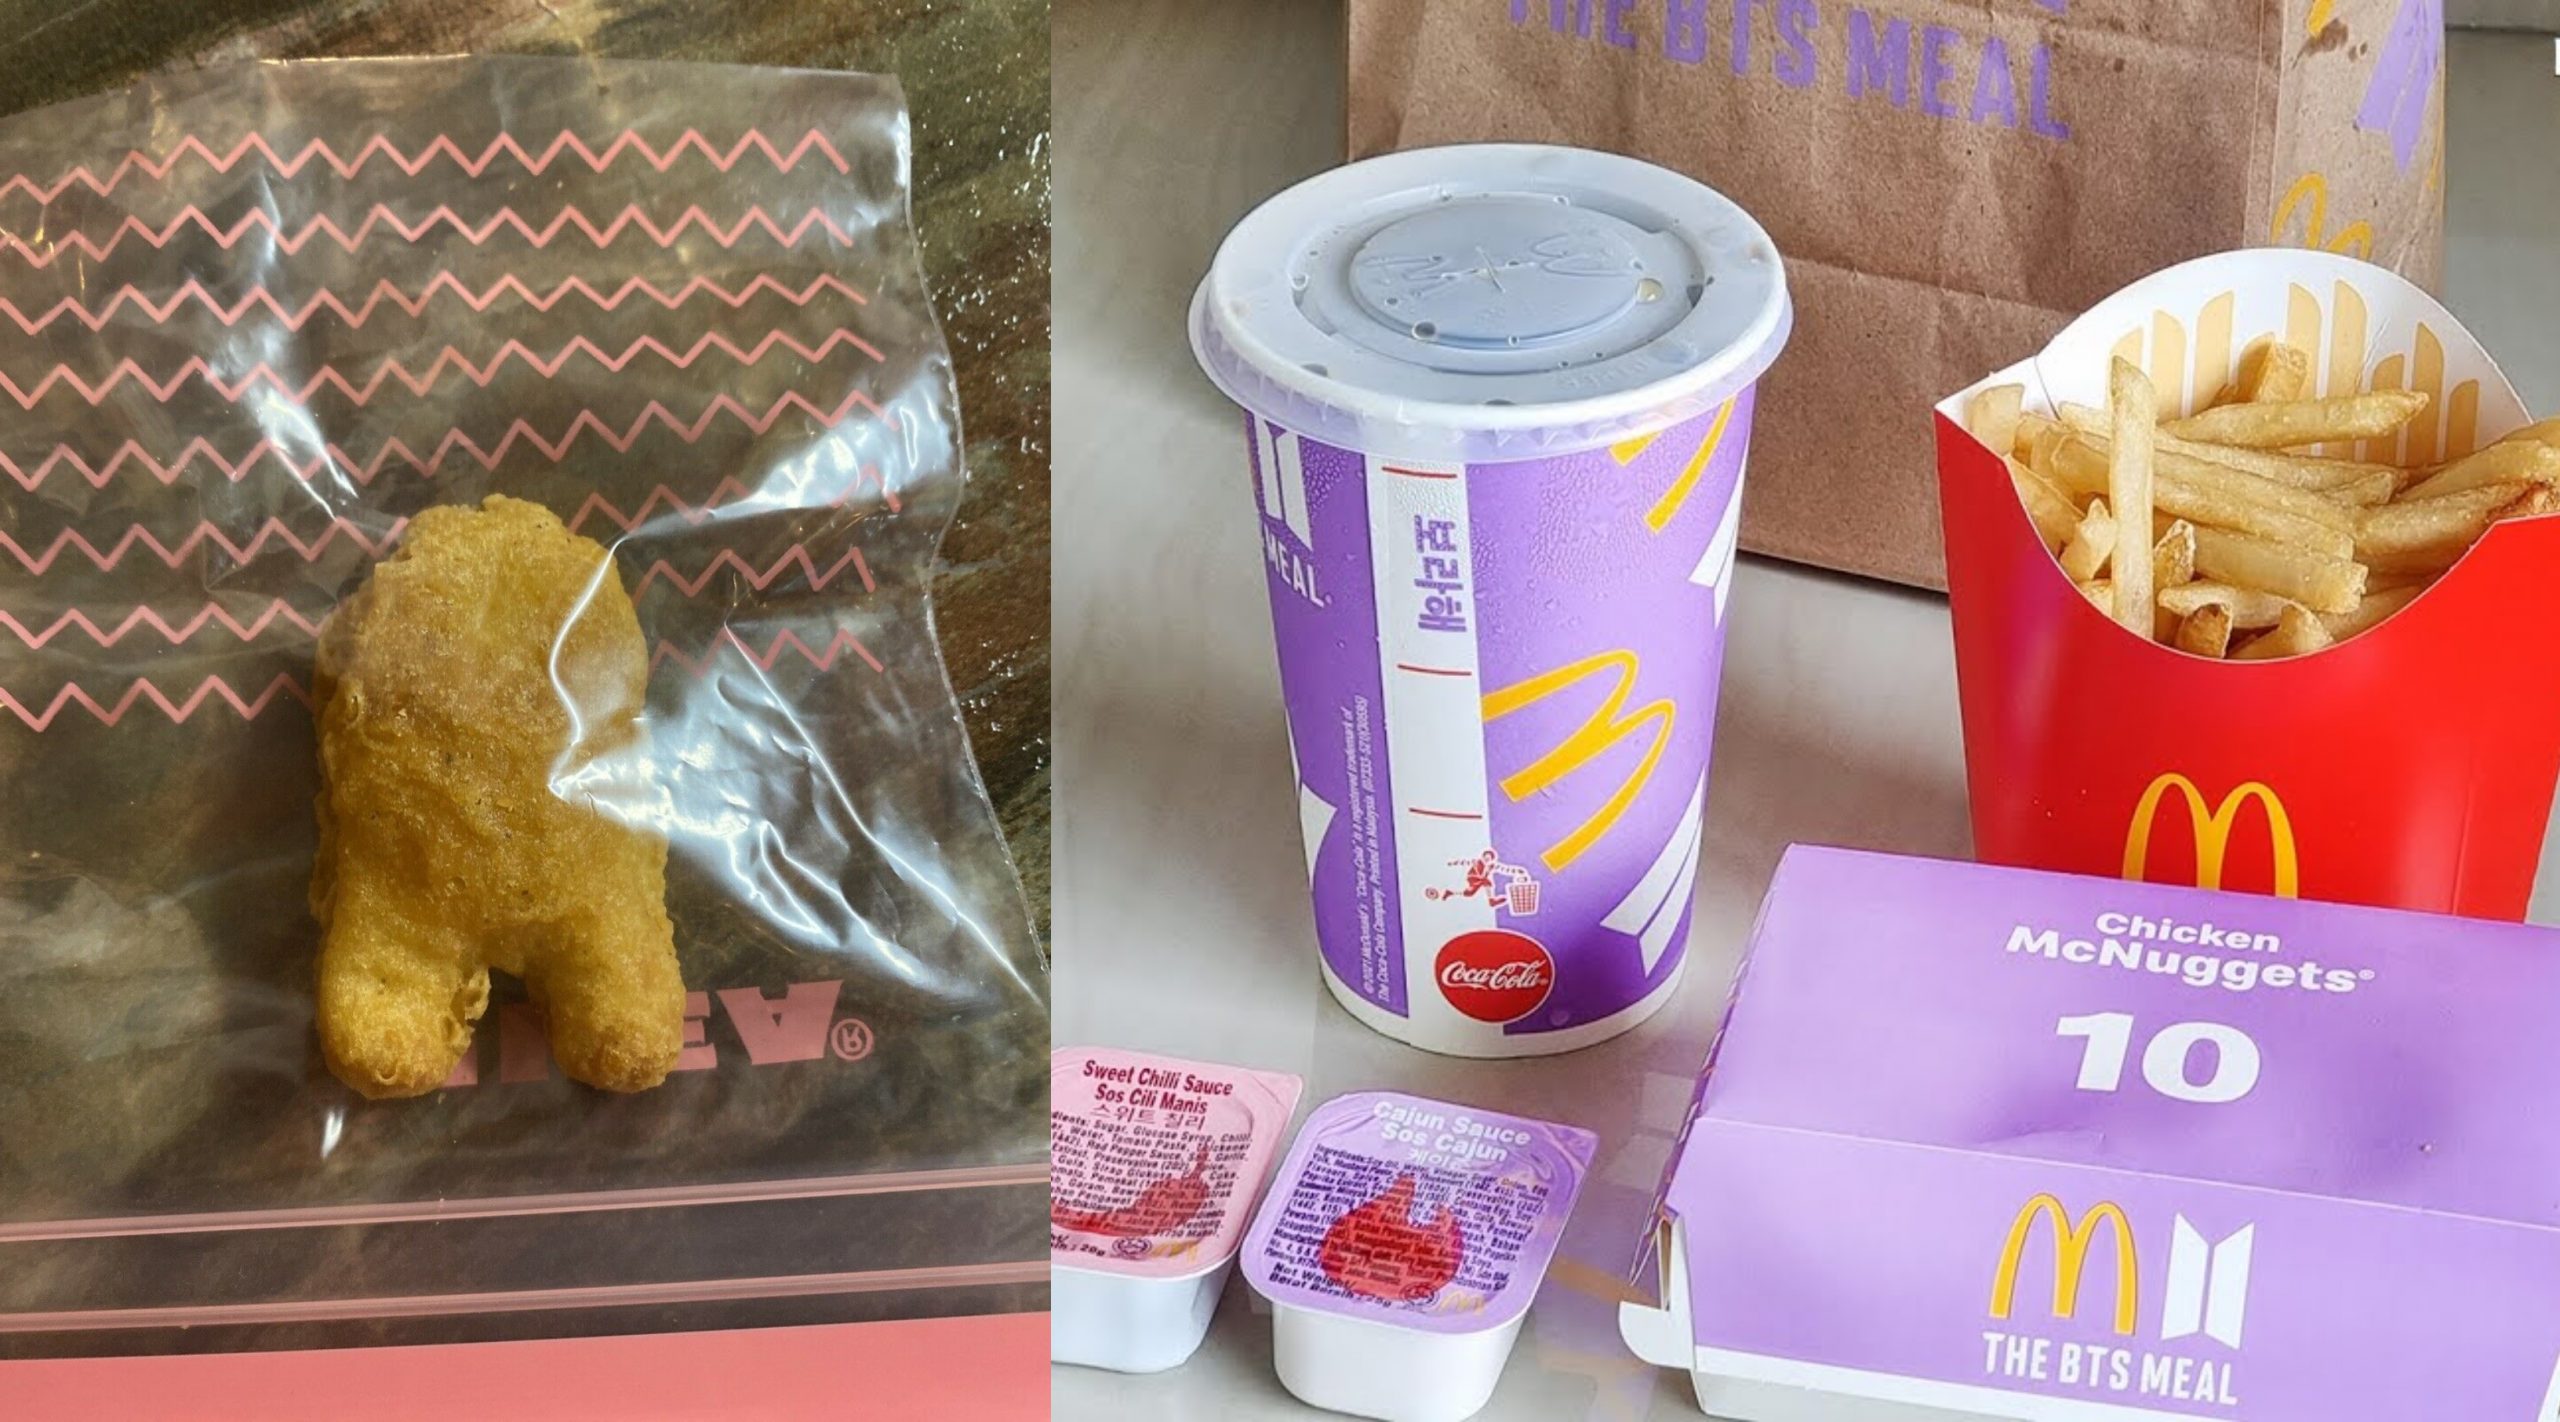 Mcd S Bts Meal Nugget That Looks Like Among Us ‘crewmate Bids For Rm286 770